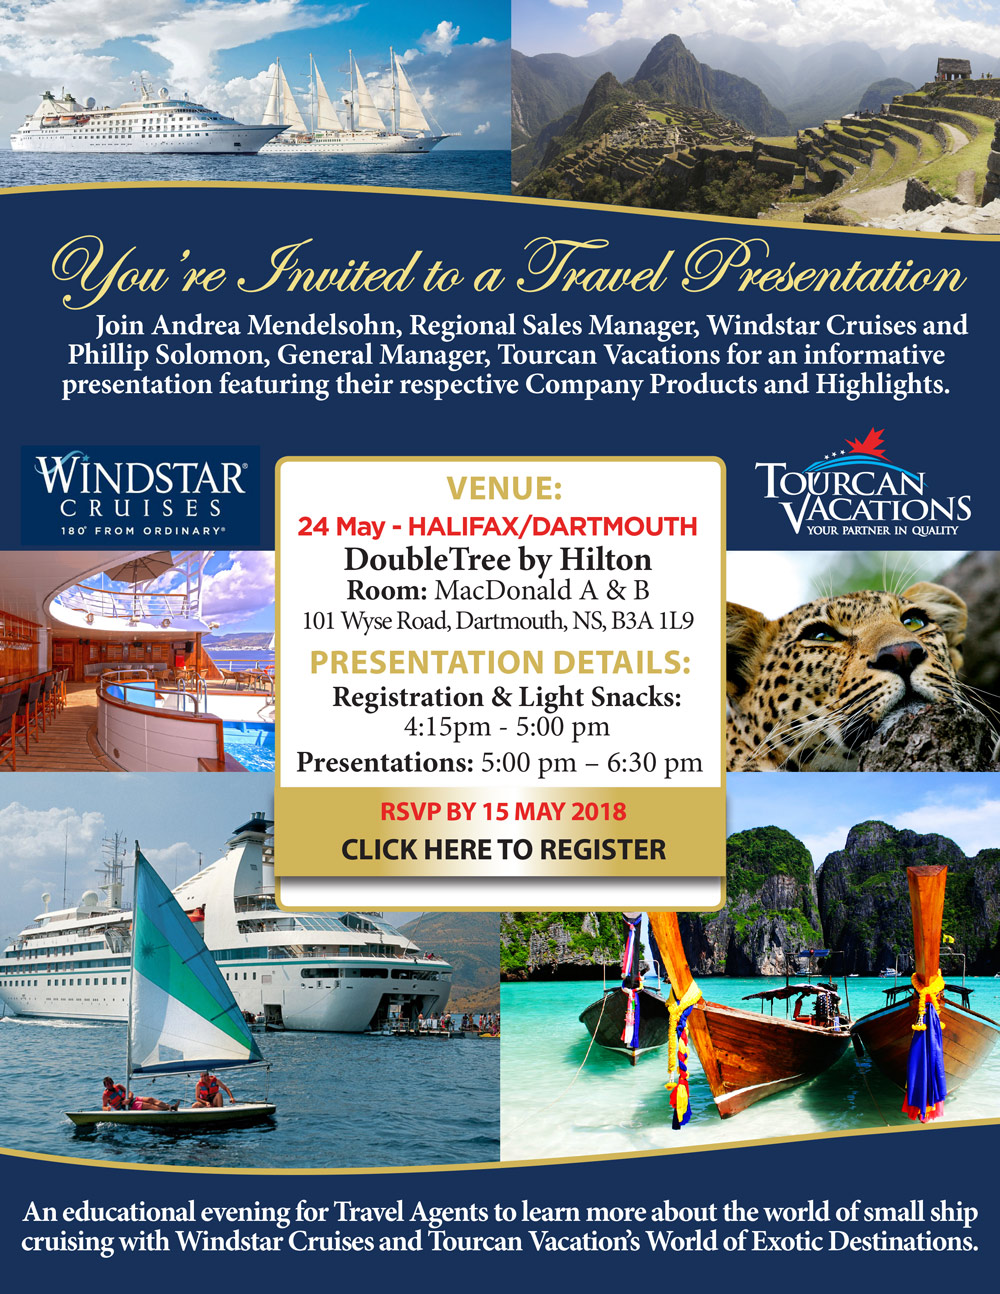 tourcan-2018-presentations-travel-invite-tourcan-vacations-and-windstar-cruises-halifax